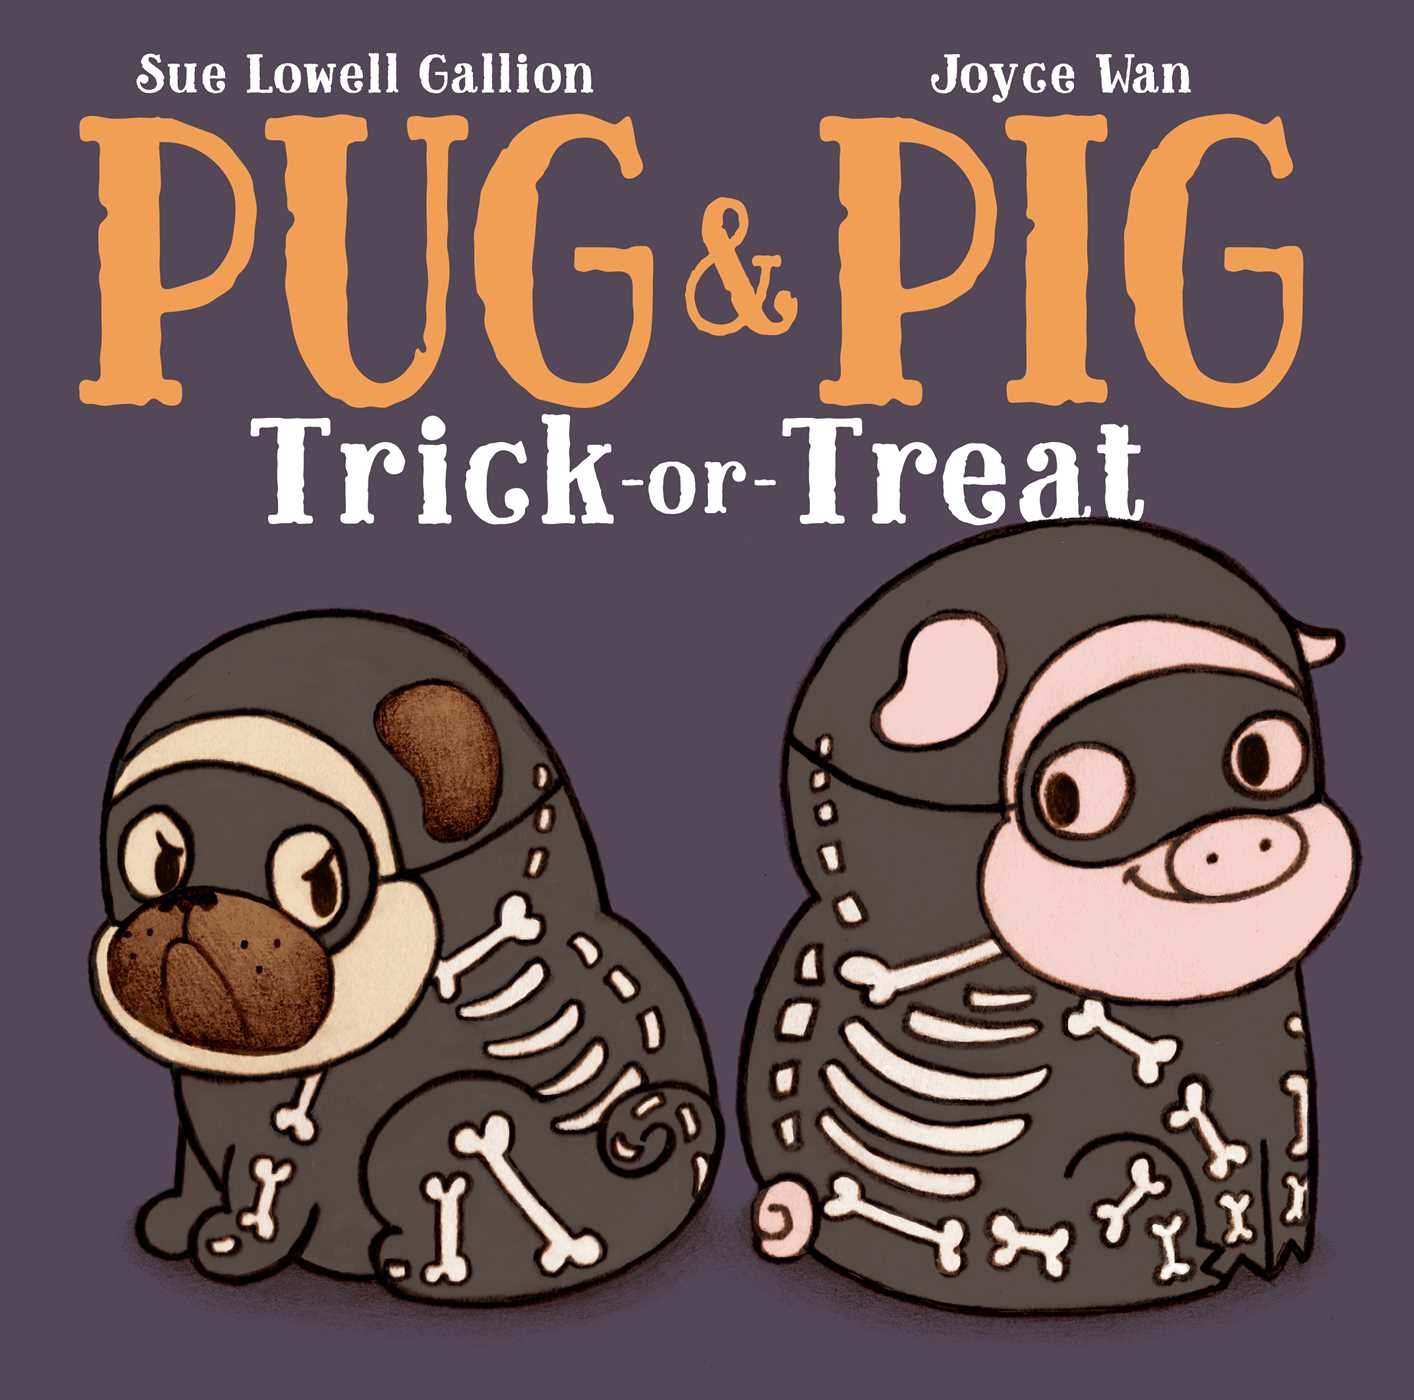 Pug & Pig Trick or Treat cover.